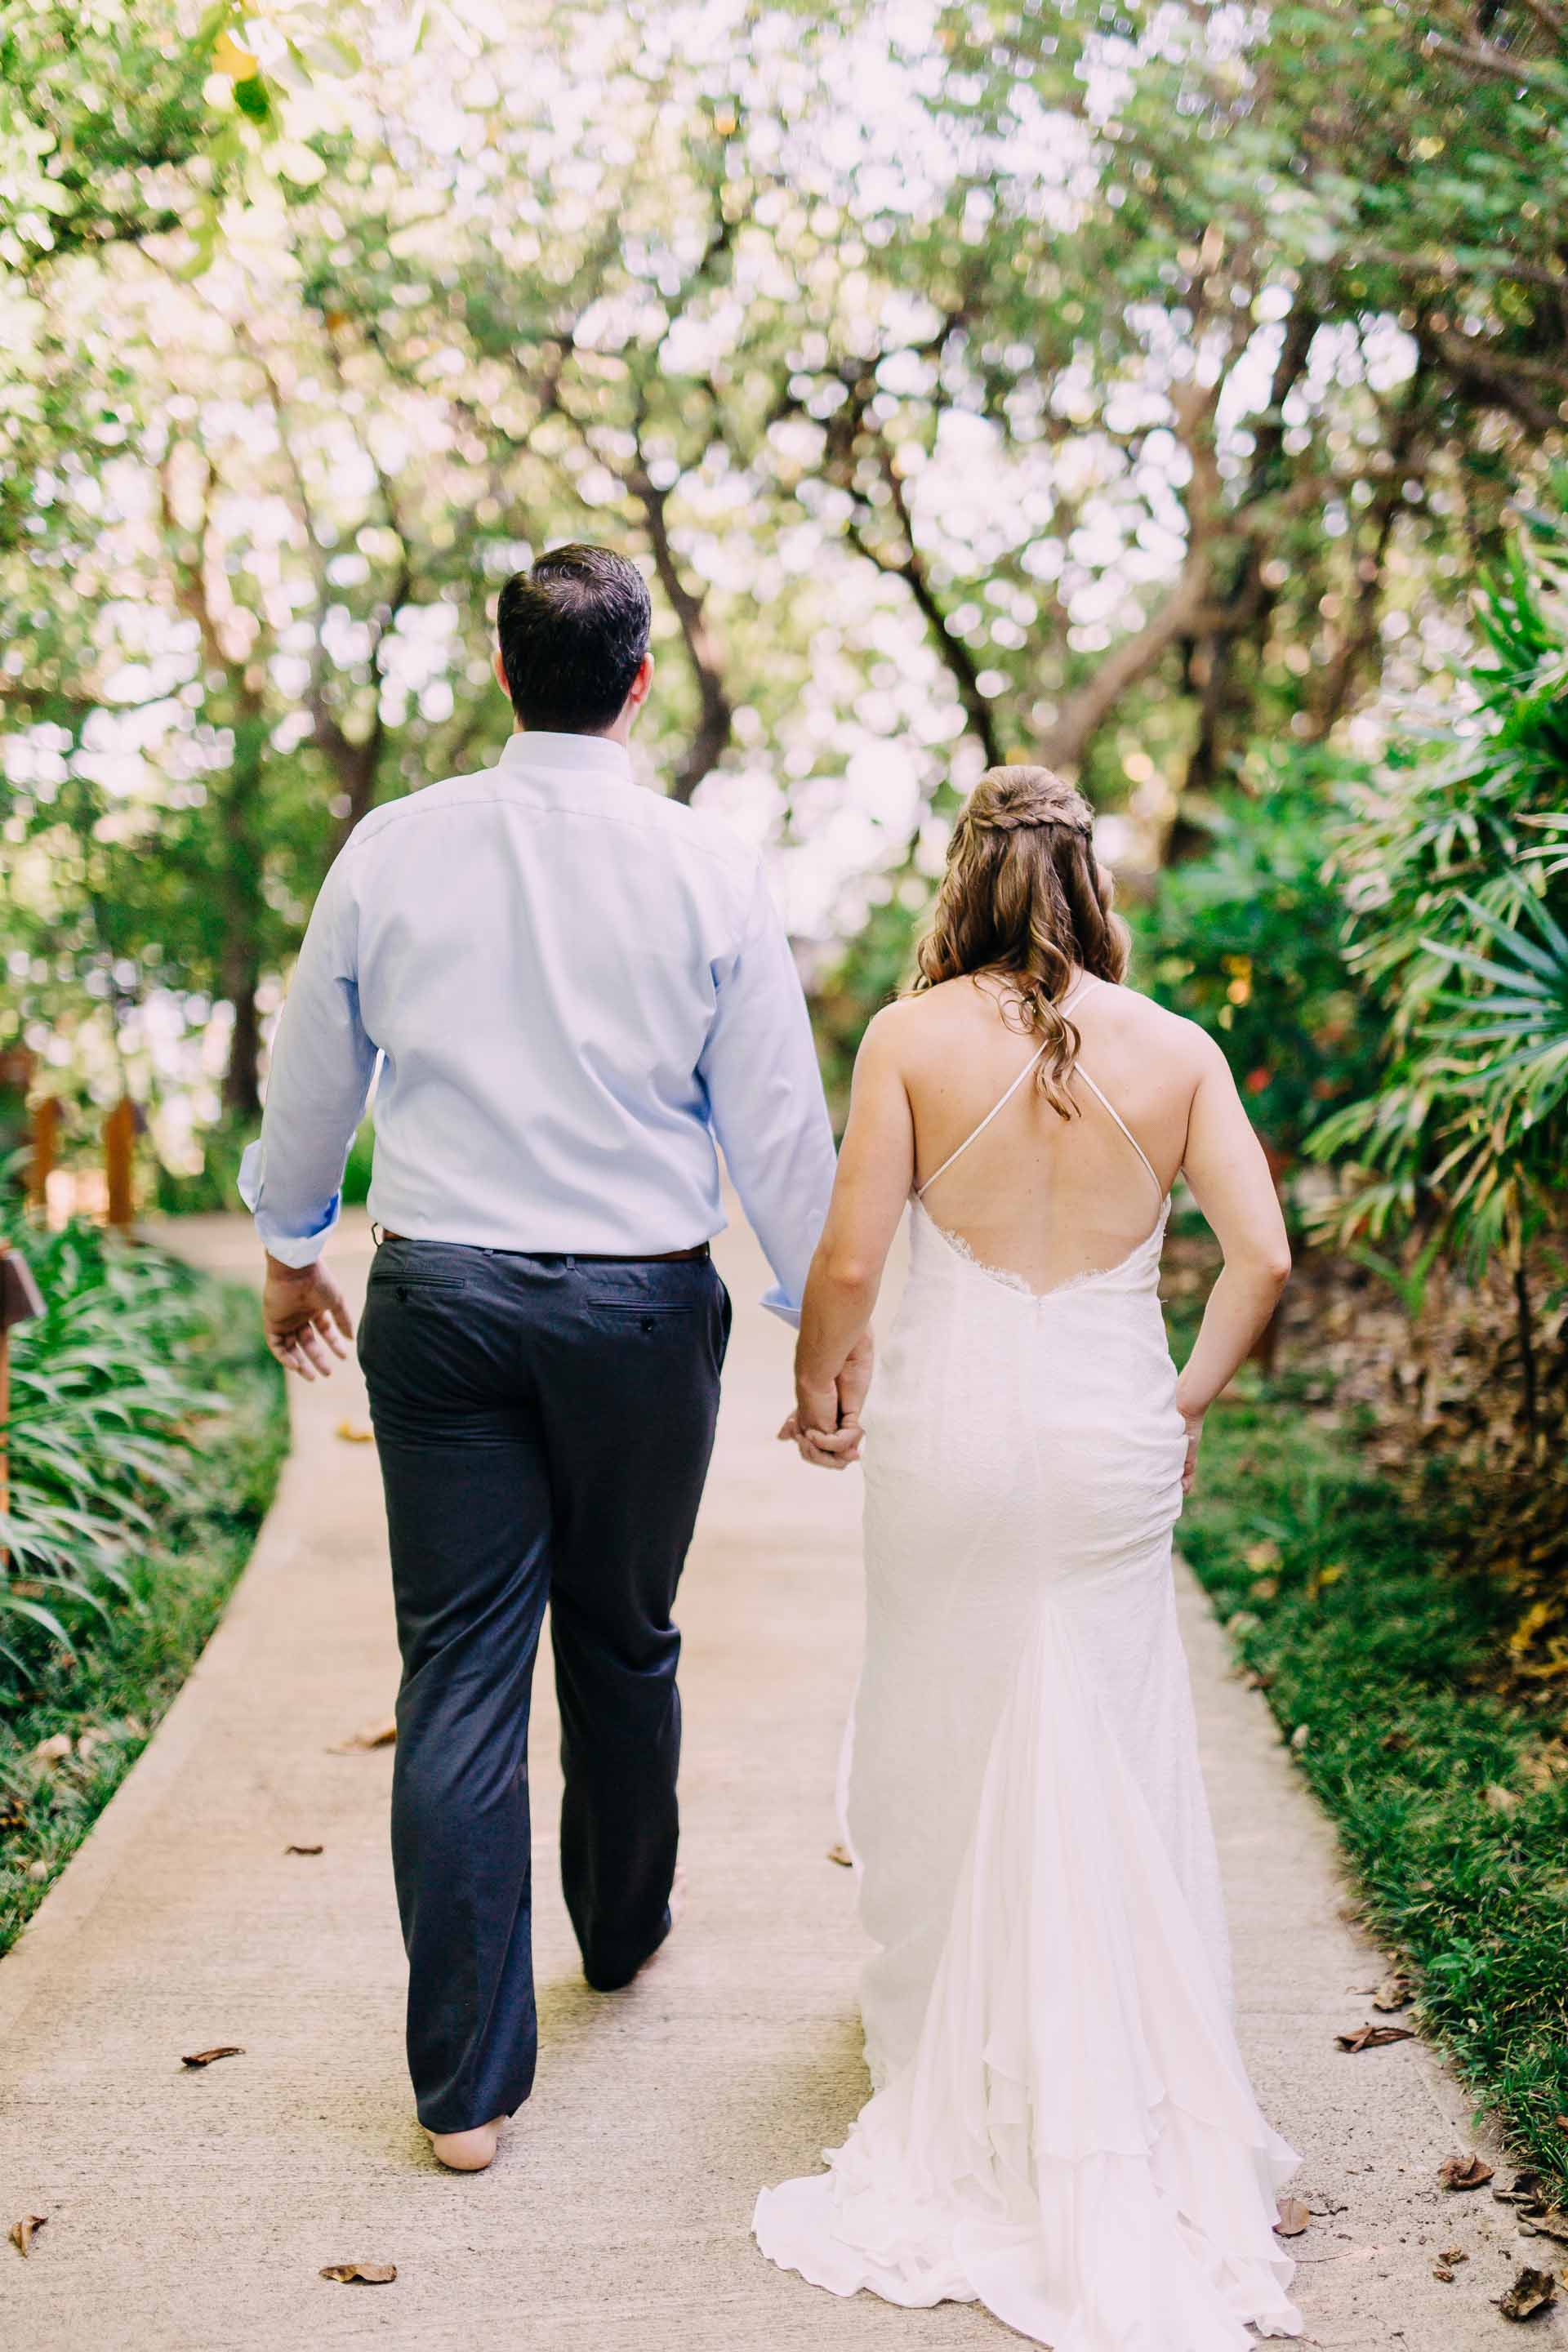 Couple hand in hand ready to get married in Fiji.